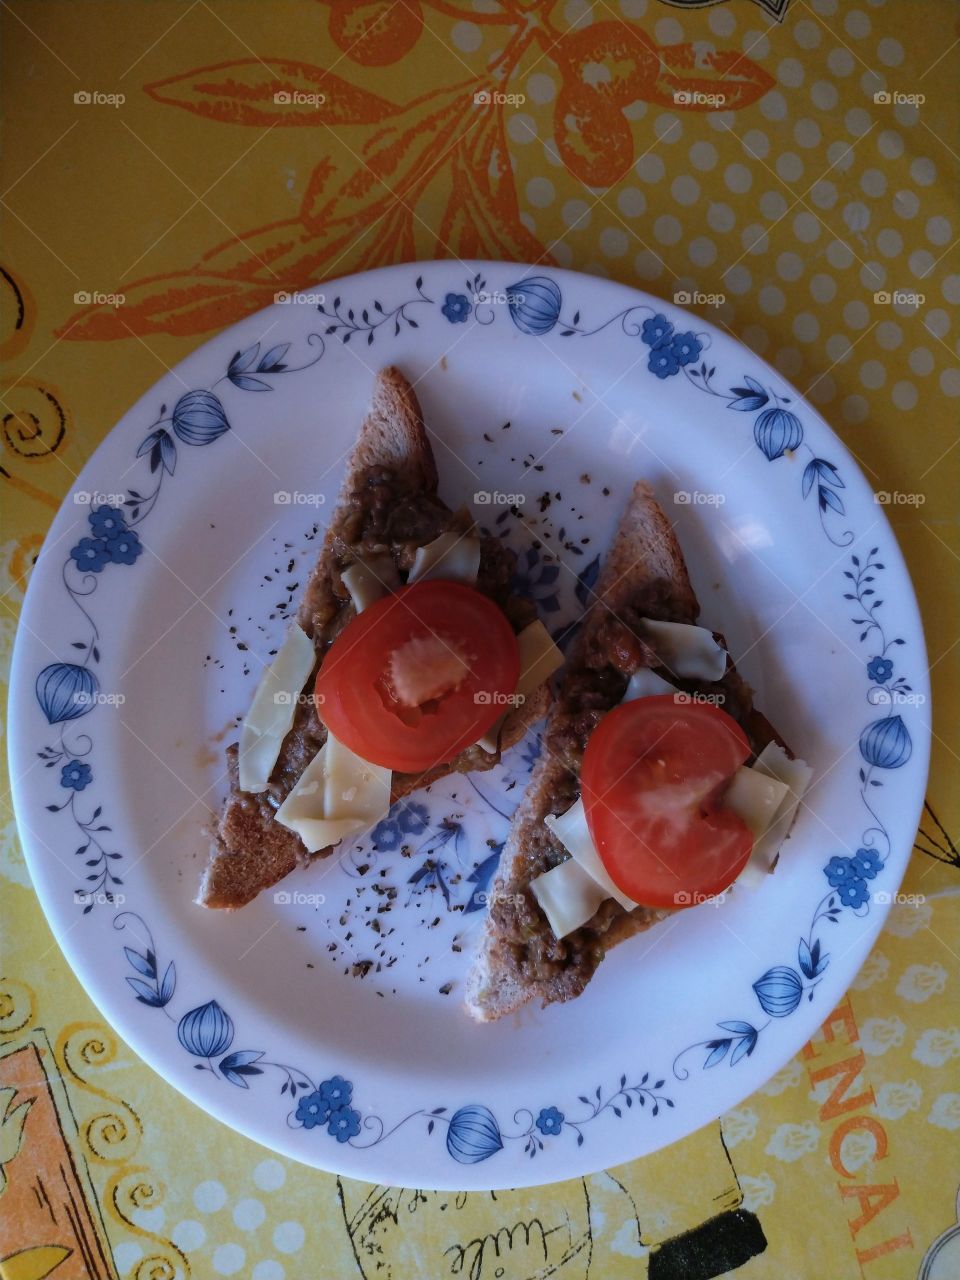 Snack - Zucchini and chopped steak on bread toast with tomato and cheese on top